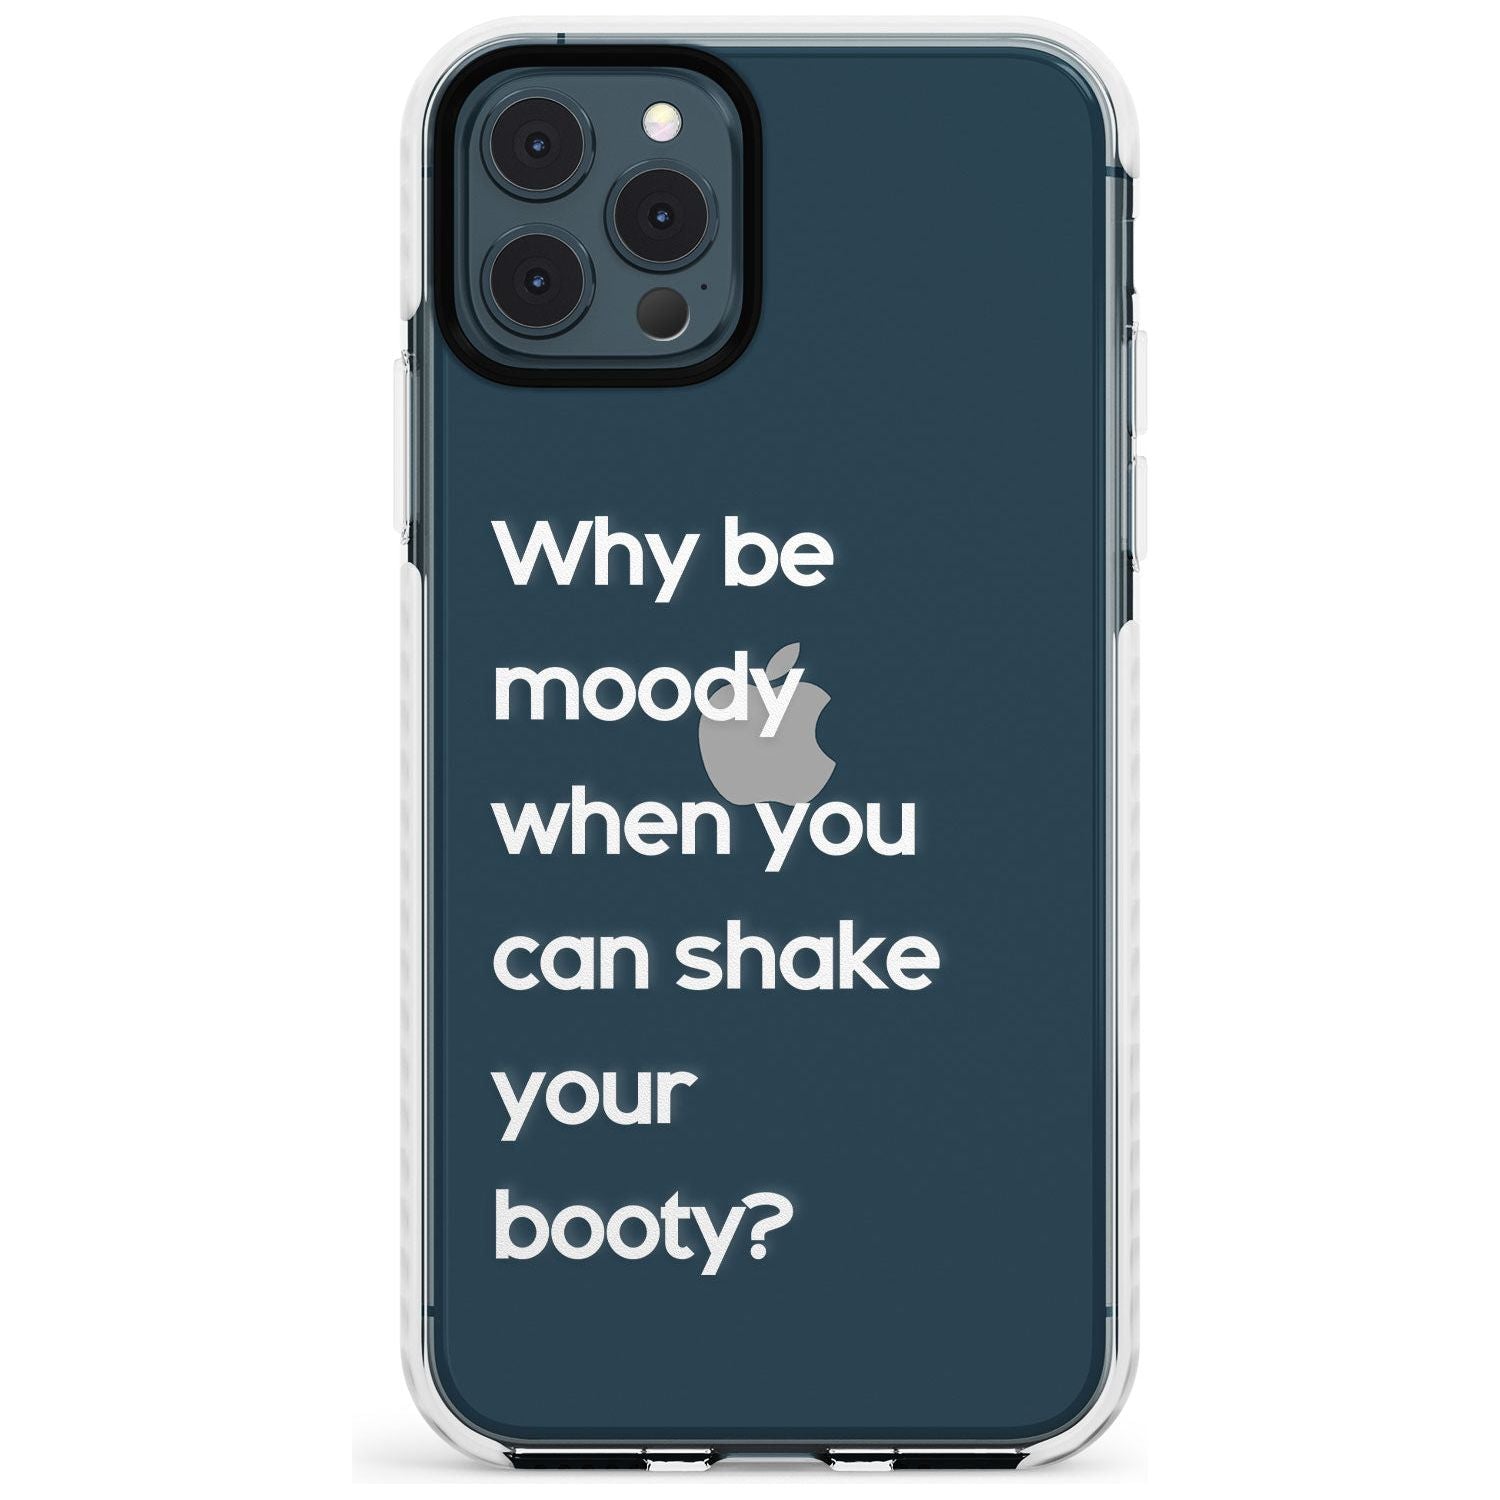 Why be moody? (White) Slim TPU Phone Case for iPhone 11 Pro Max